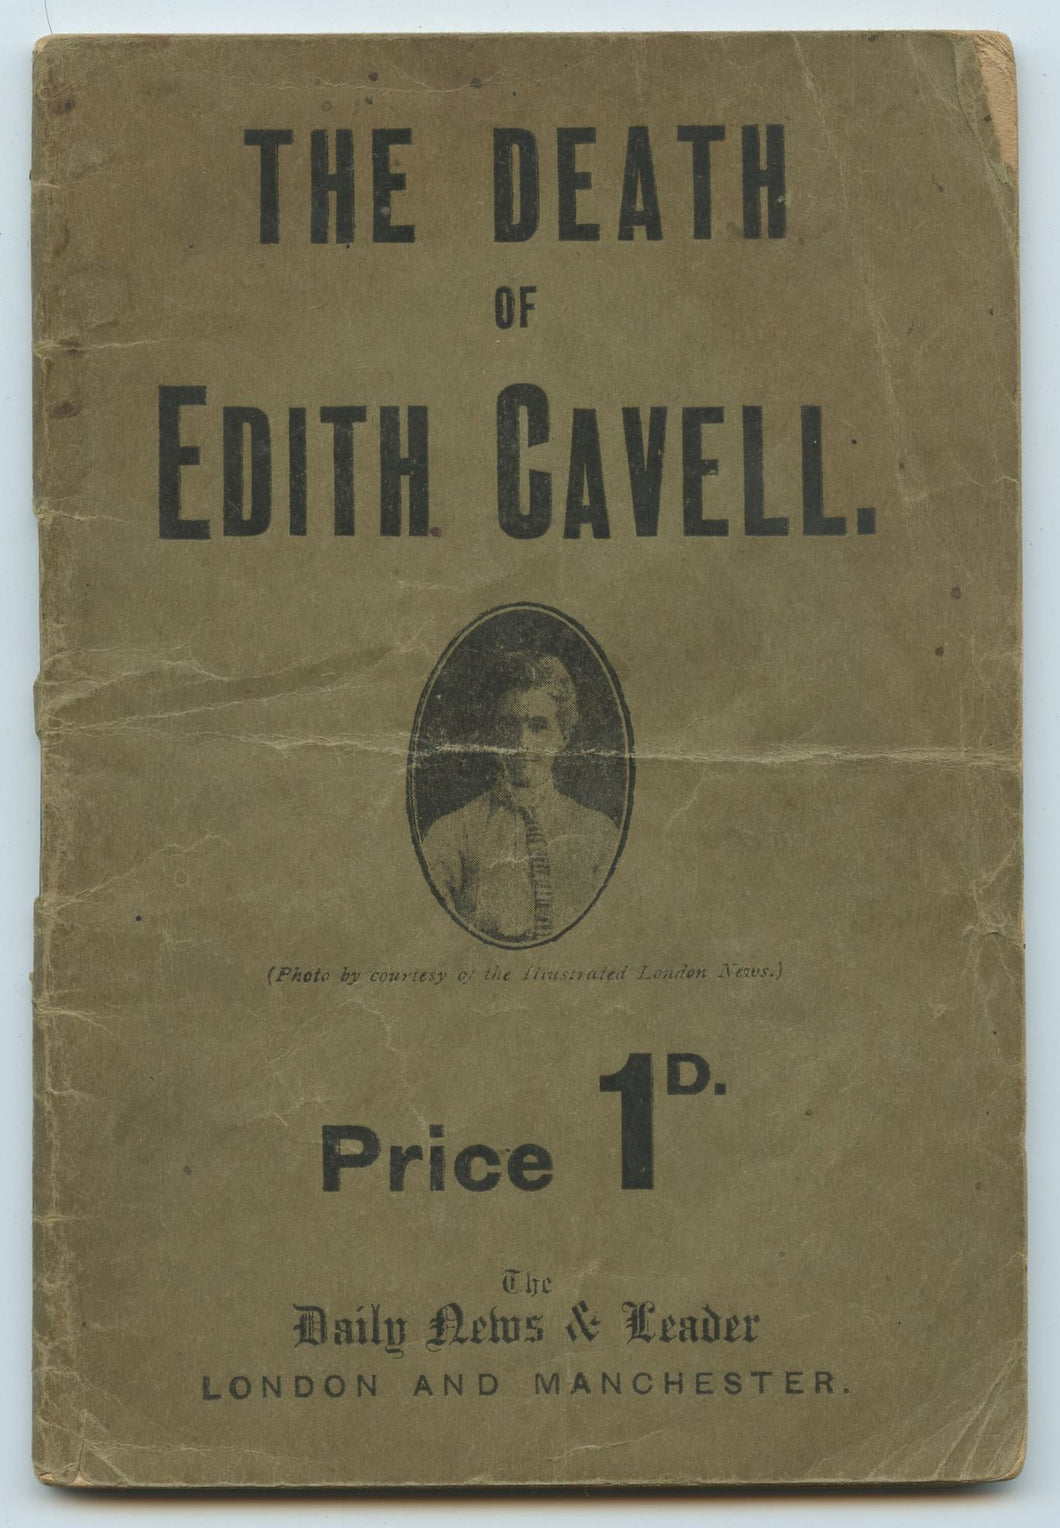 The Death of Edith Cavell